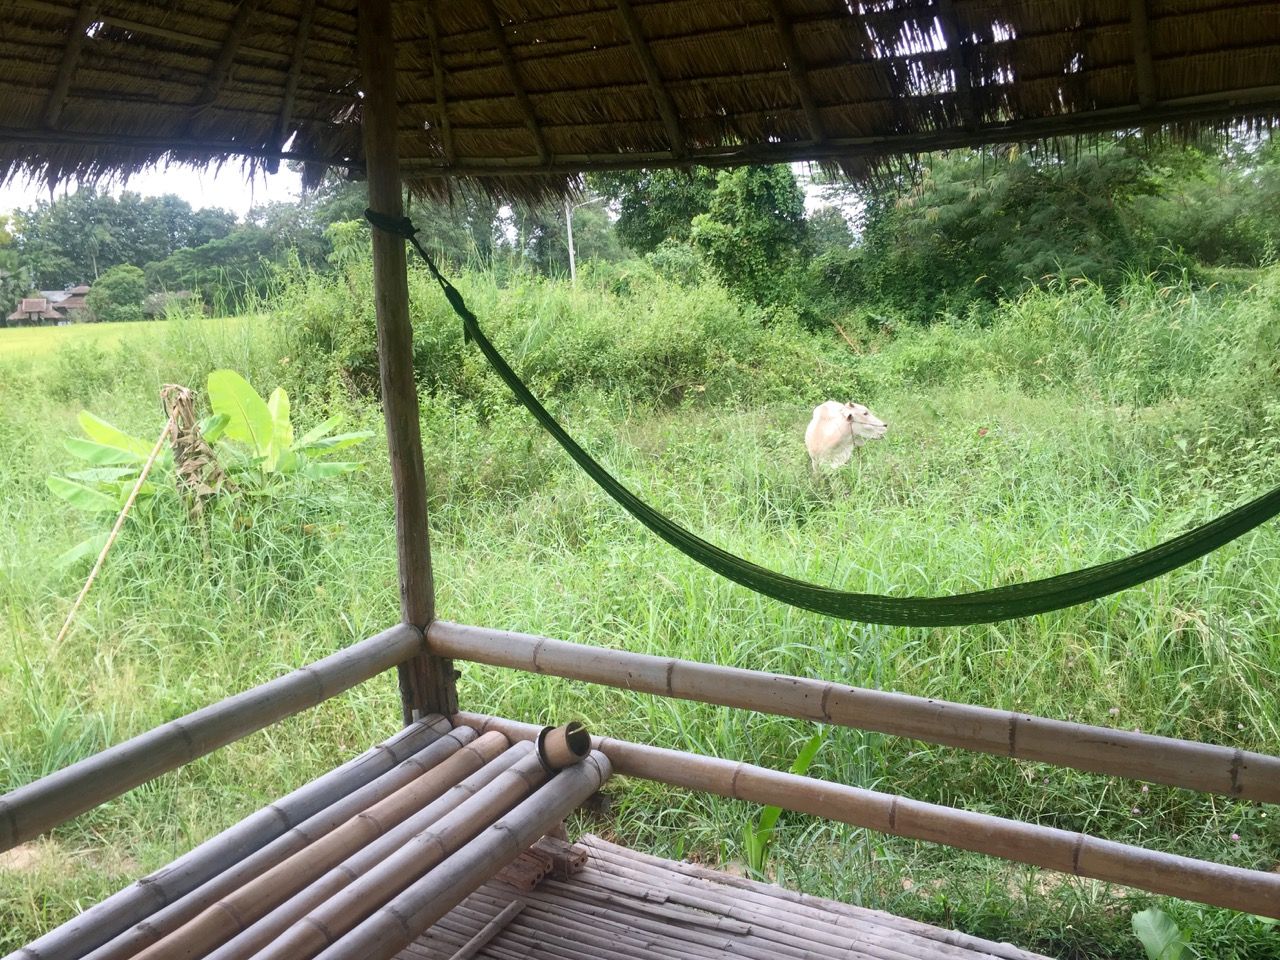 A cow eating grass in front of a bungalow with a porch.